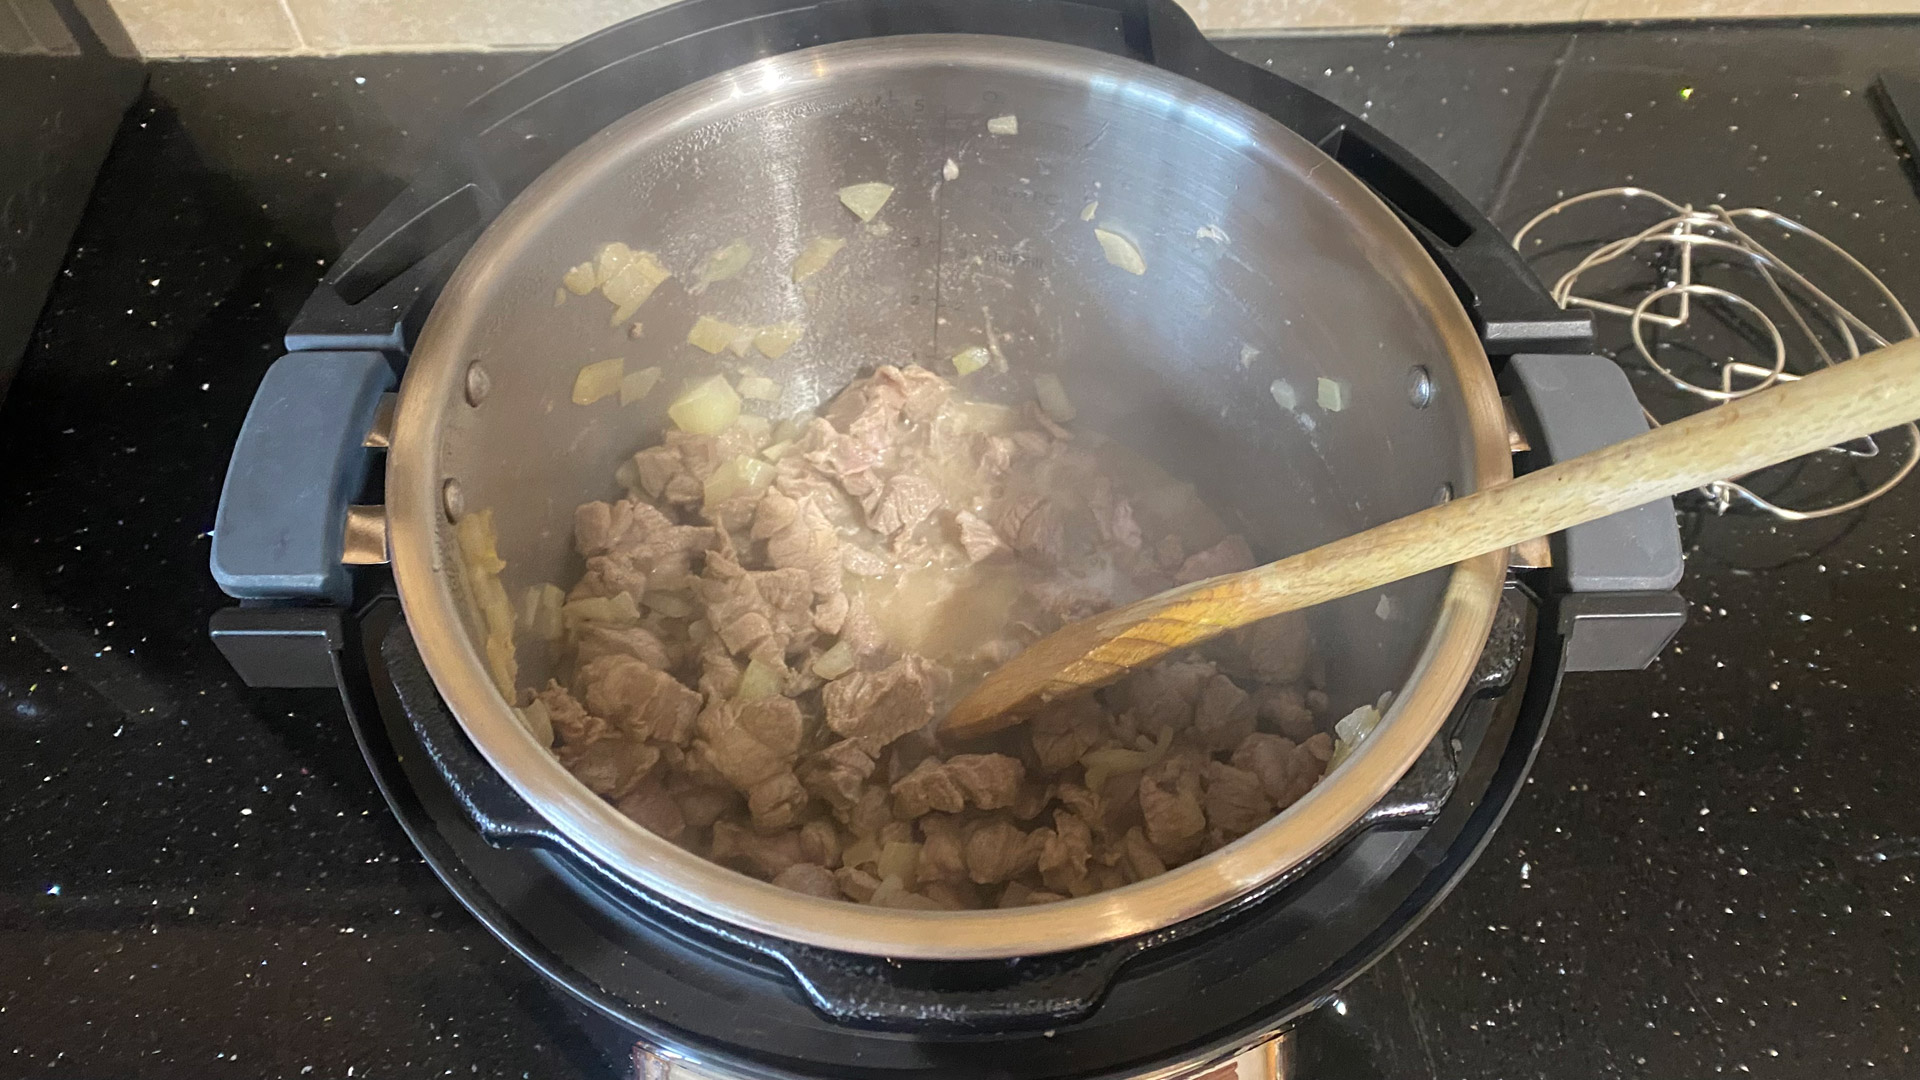 Saute-ing lamb for slow cooked lamb curry in the Instant Pot Pro Plus Smart Multi-Cooker